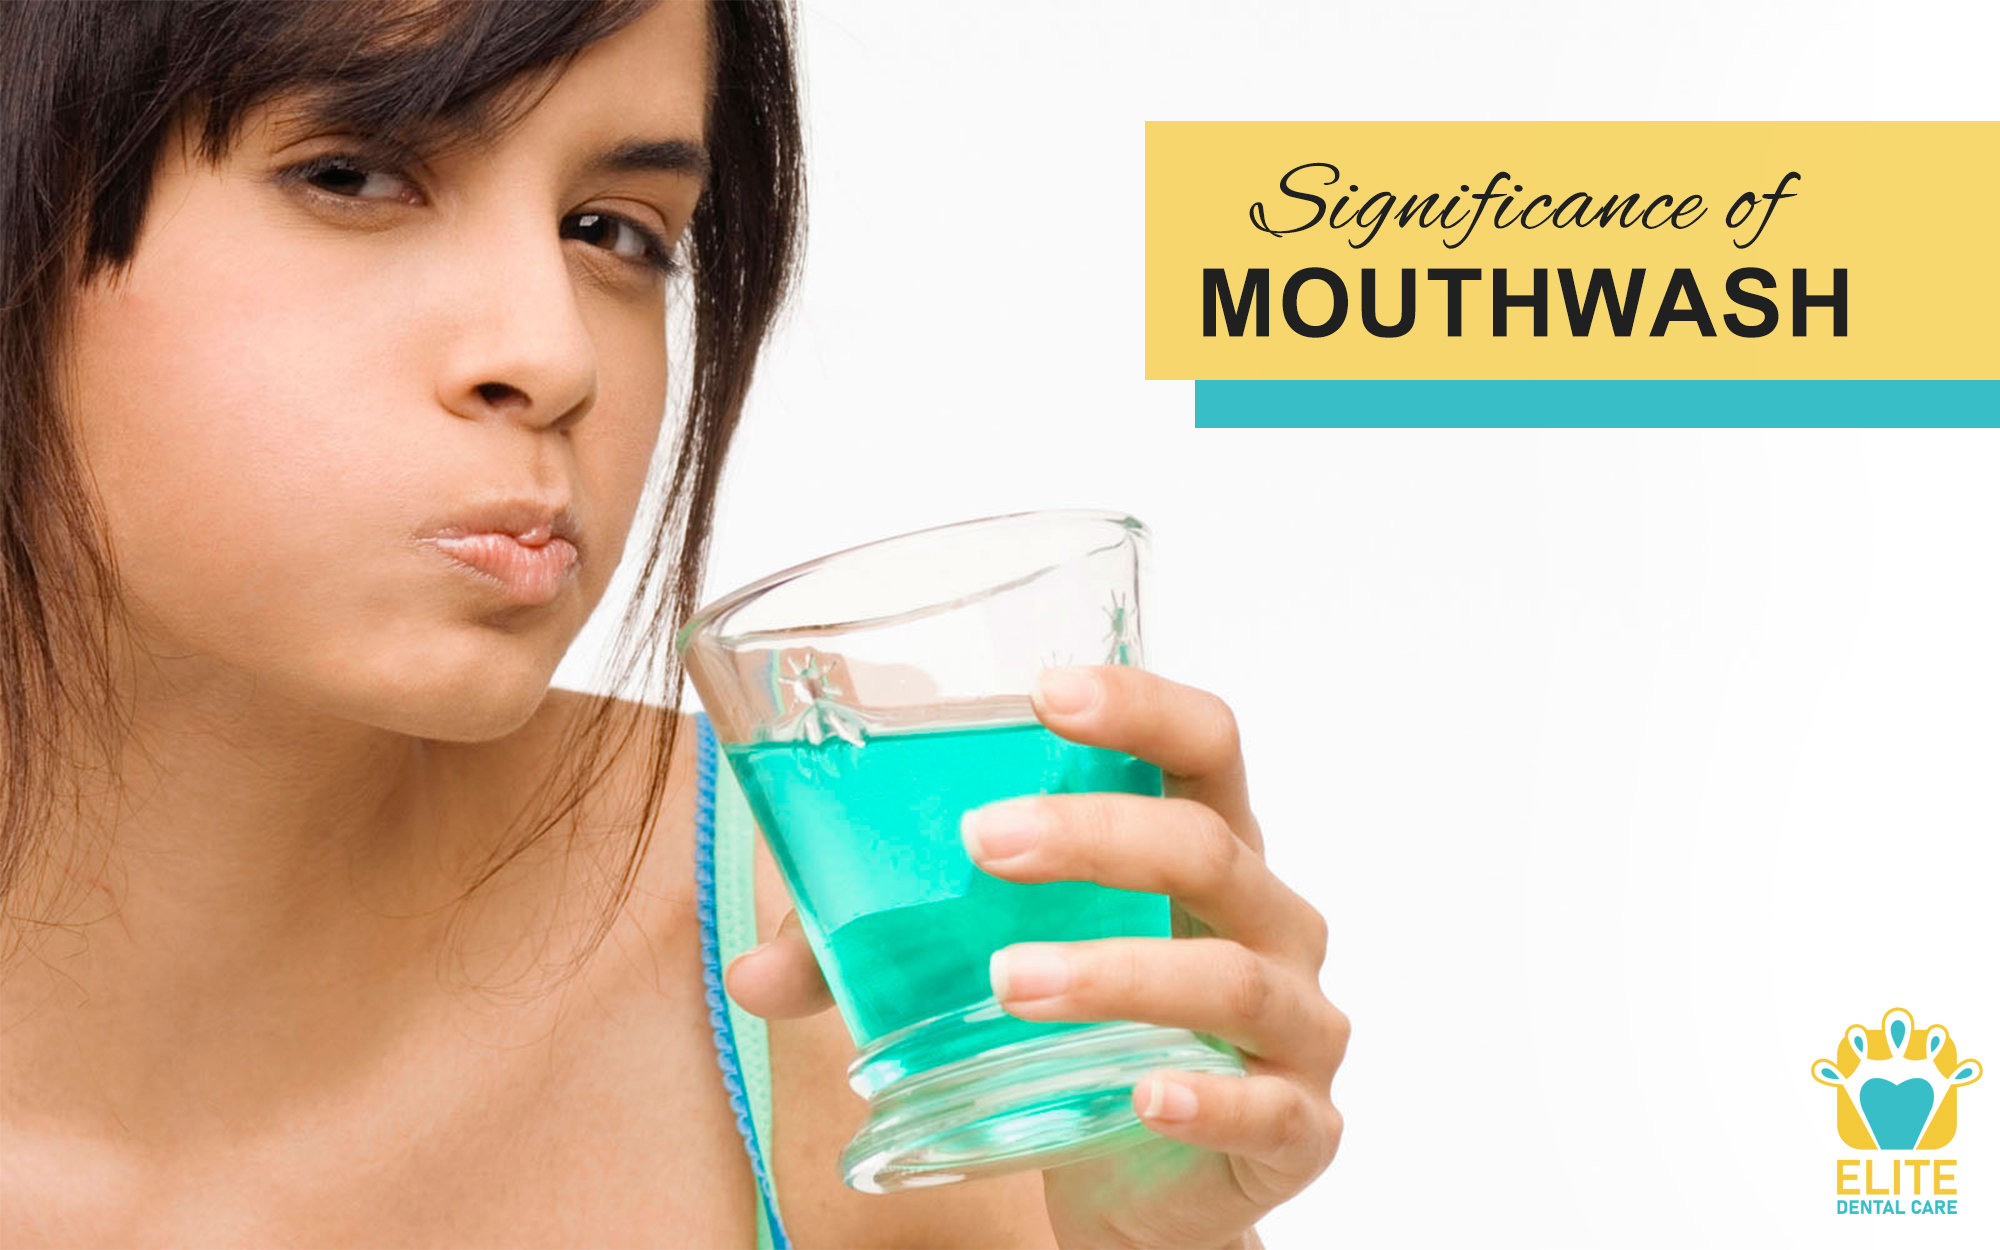 SIGNIFICANCE OF MOUTHWASH – ELITE DENTAL CARE TRACY